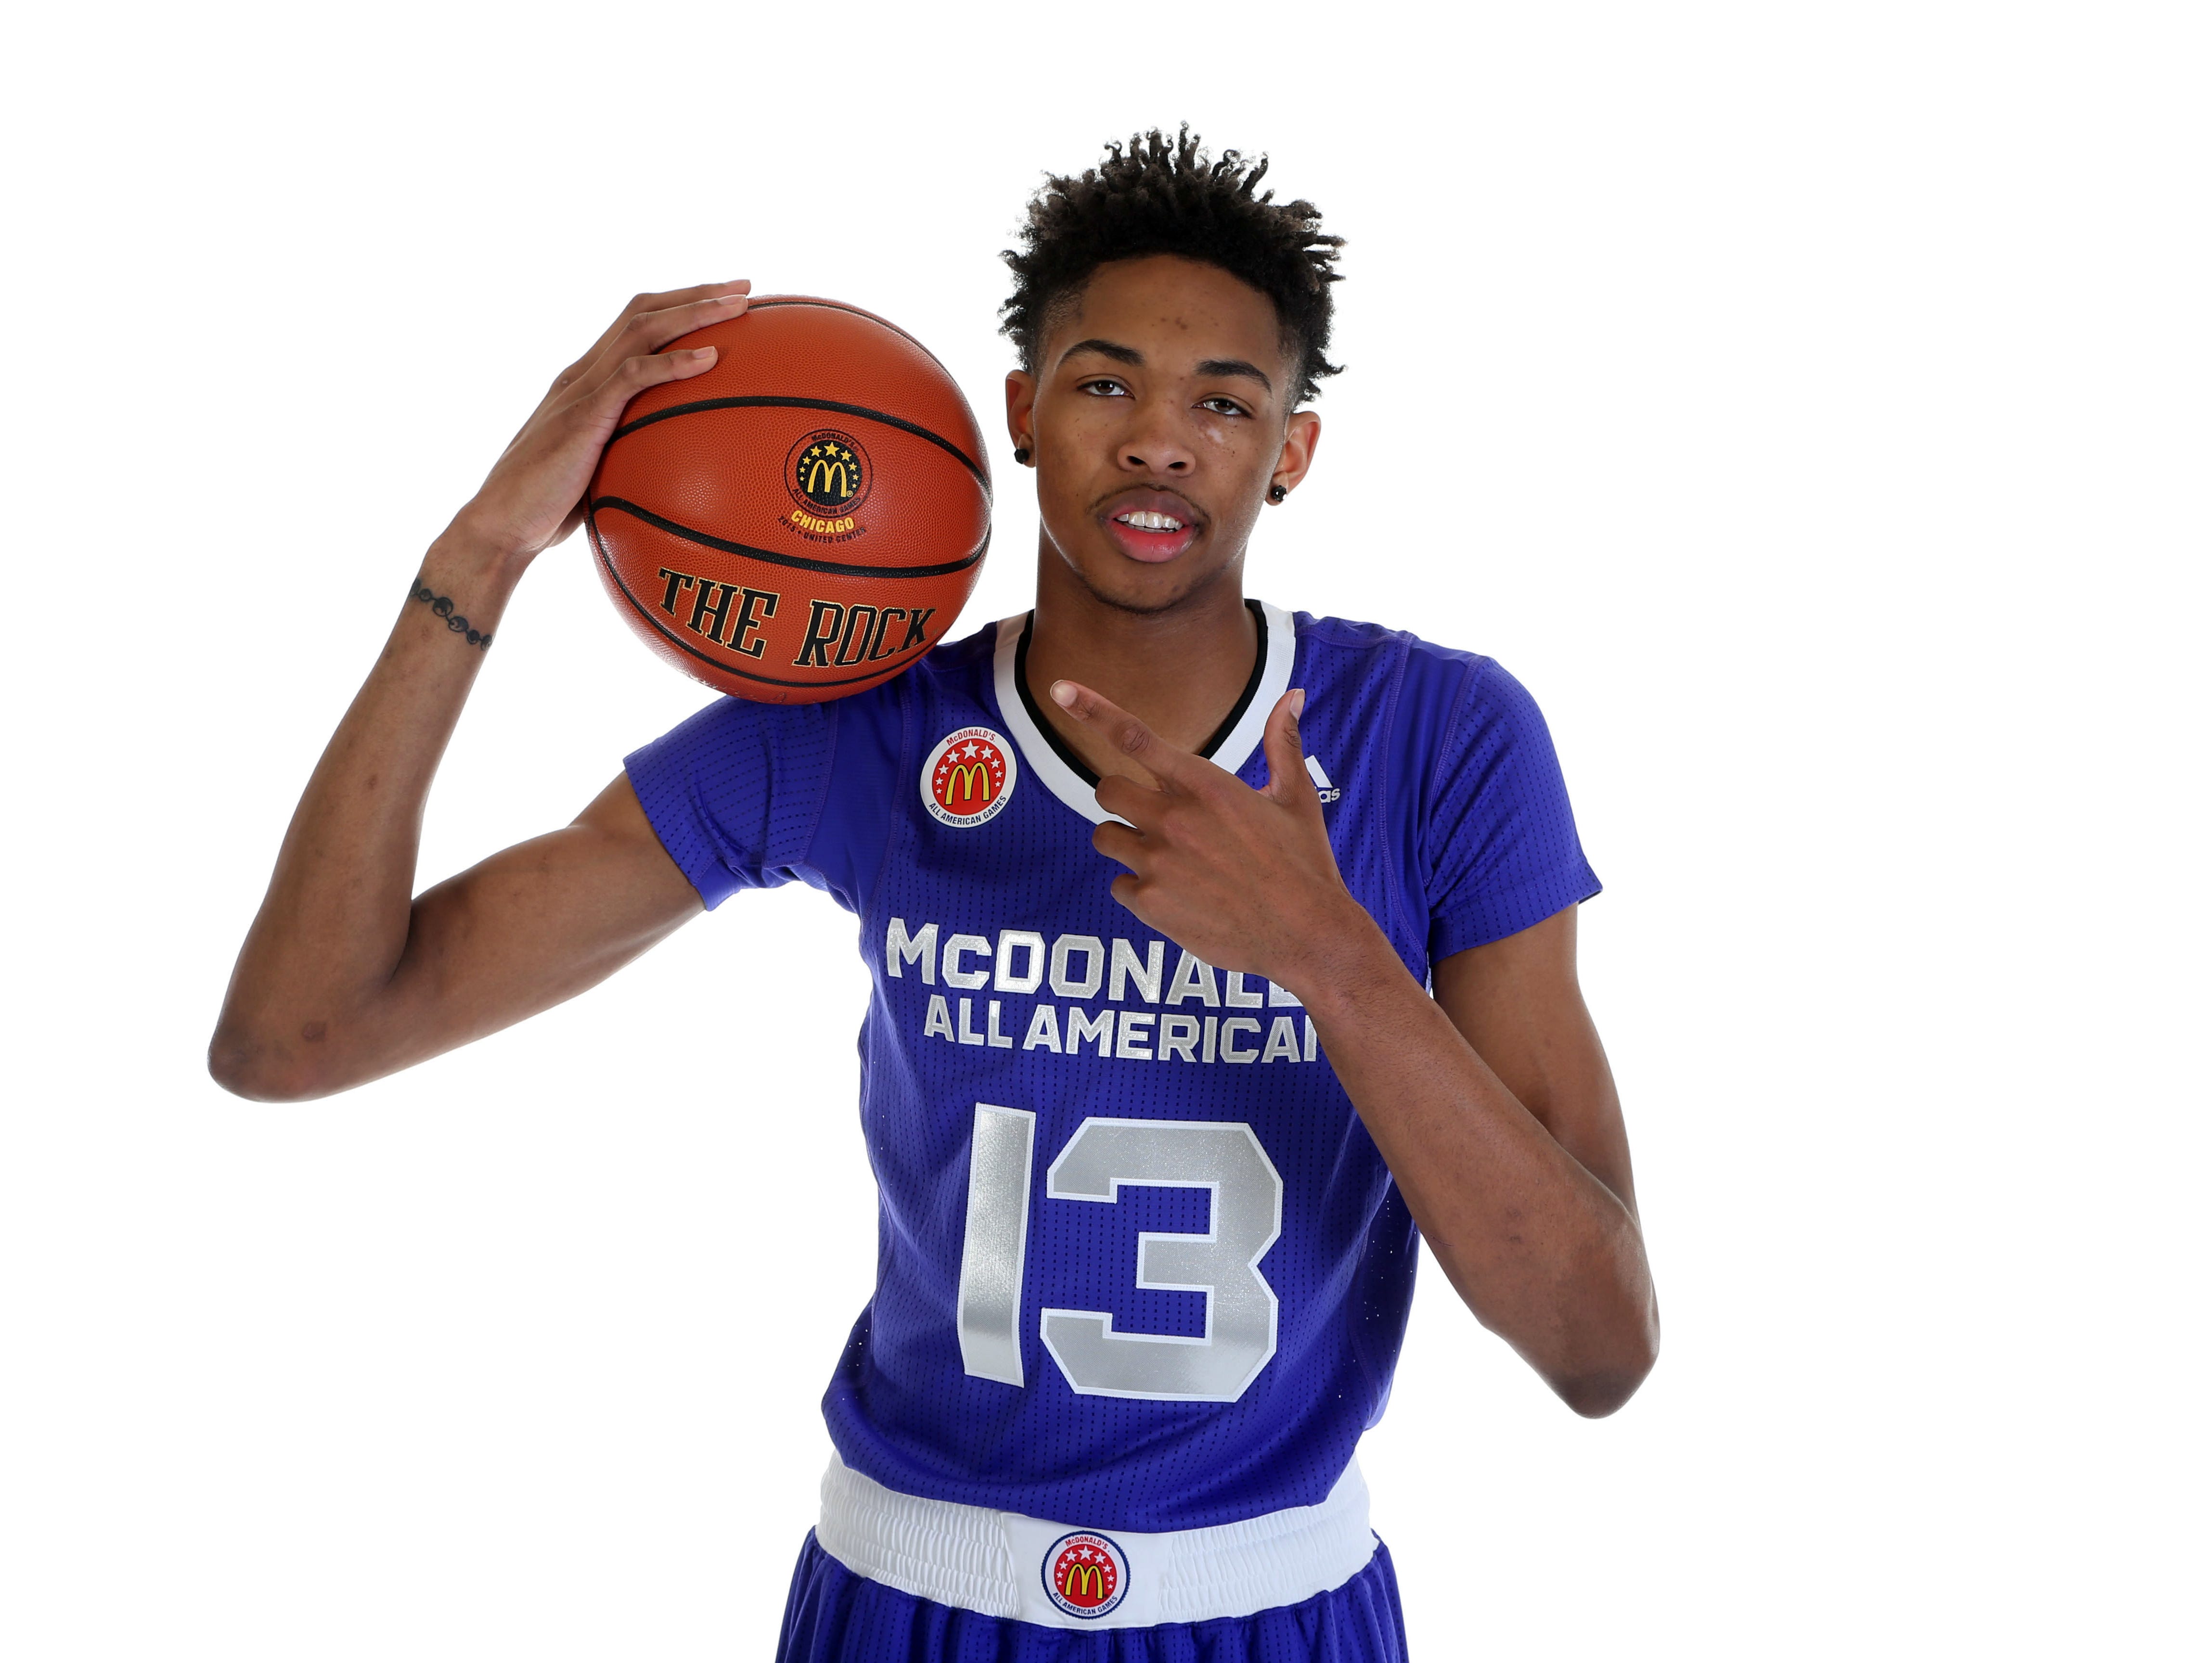 Mar 28, 2015; Chicago, IL, USA; McDonalds High School All American athlete Brandon X Ingram (13) poses for pictures during portrait day at the Westin Hotel. Mandatory Credit: Brian Spurlock-USA TODAY Sports